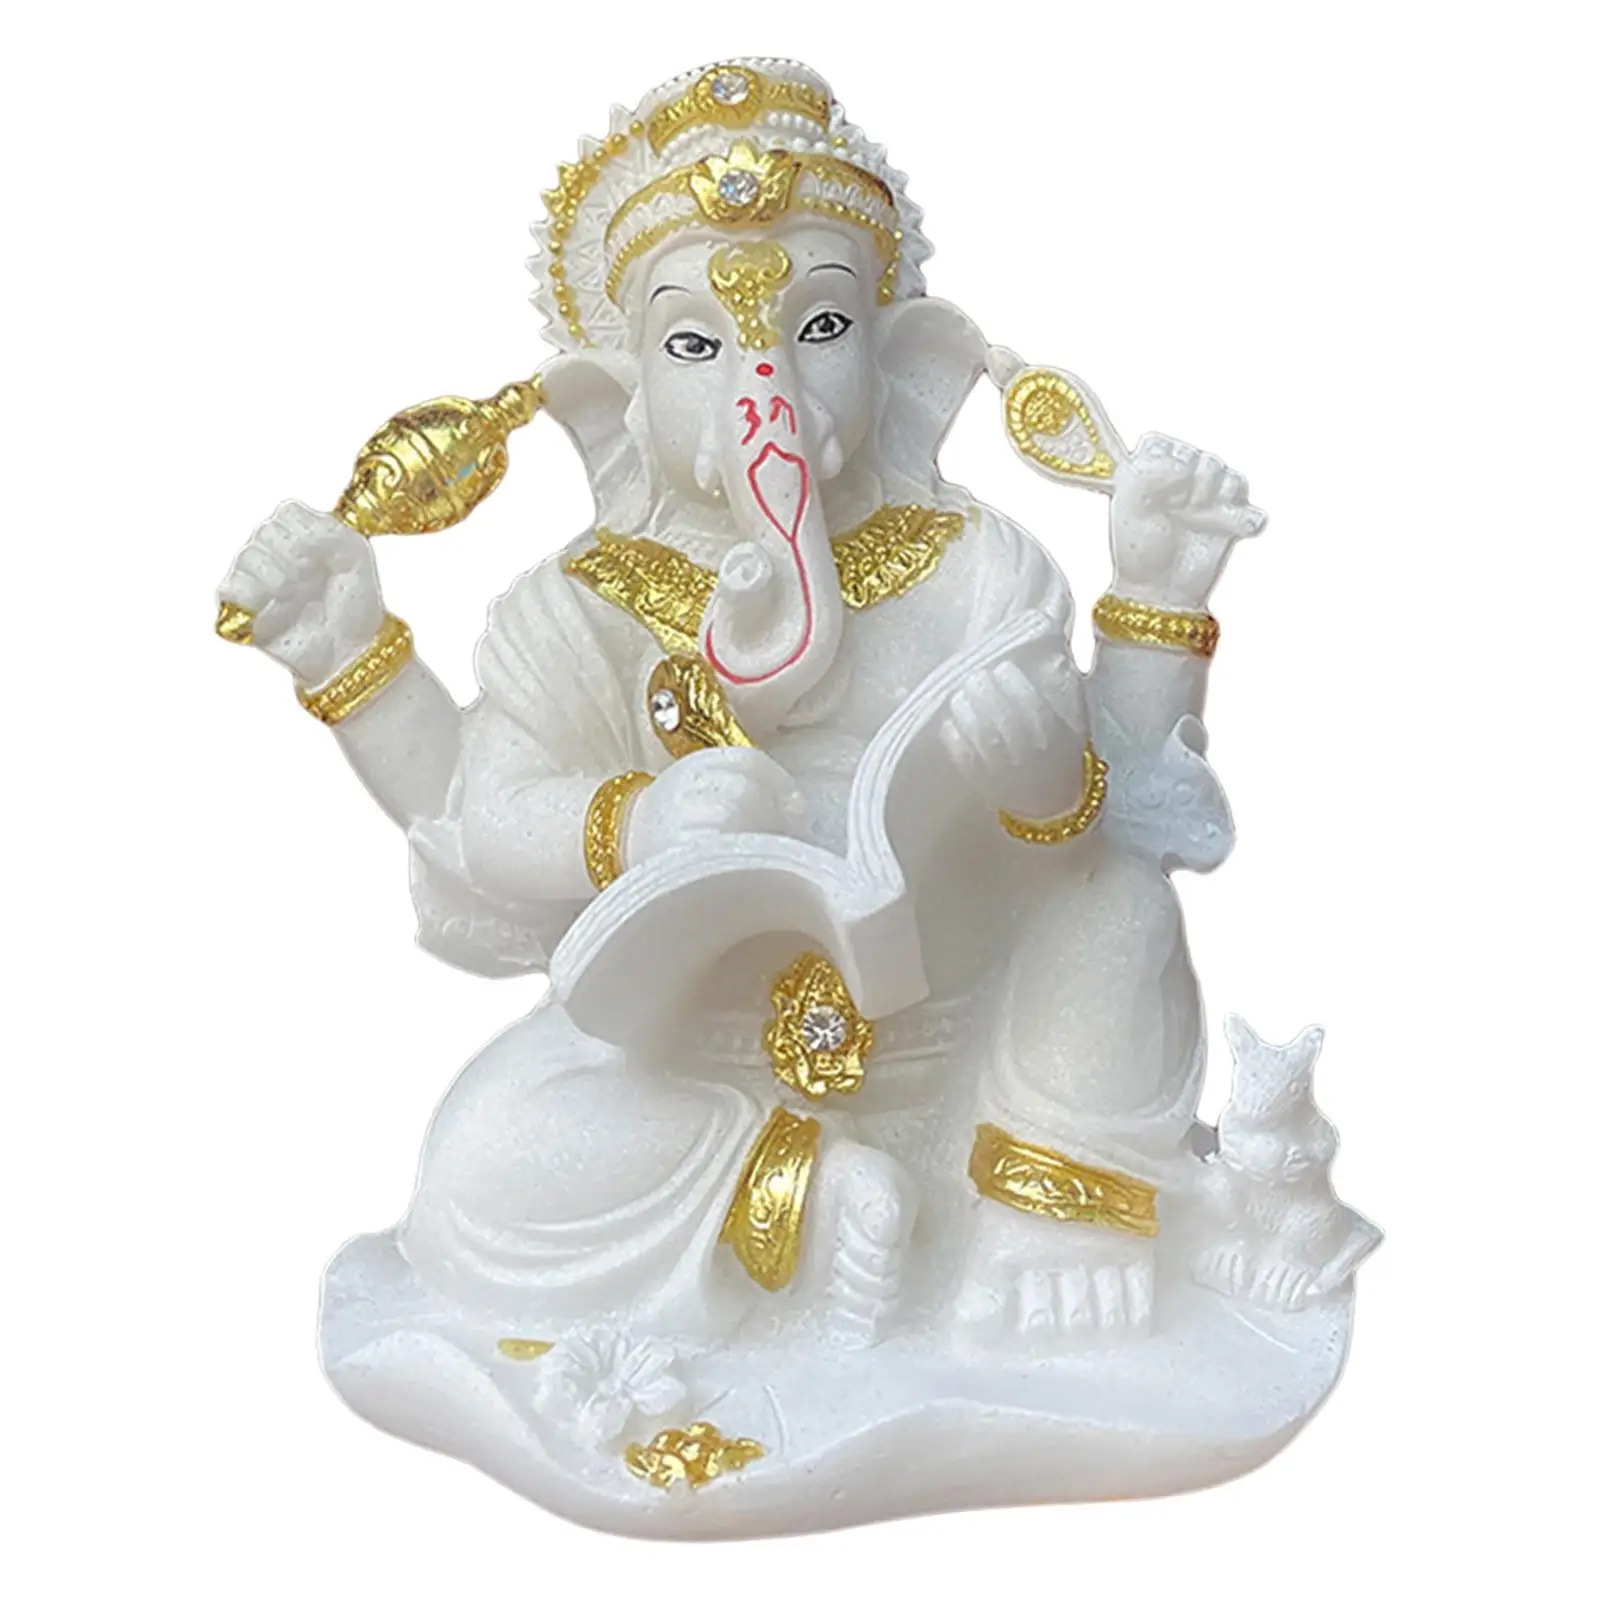 Lord Ganesha Statue Standing Elephant God Resin Indian Decoration Sculpture Ornament for Home Decor Collectible Meditation Car